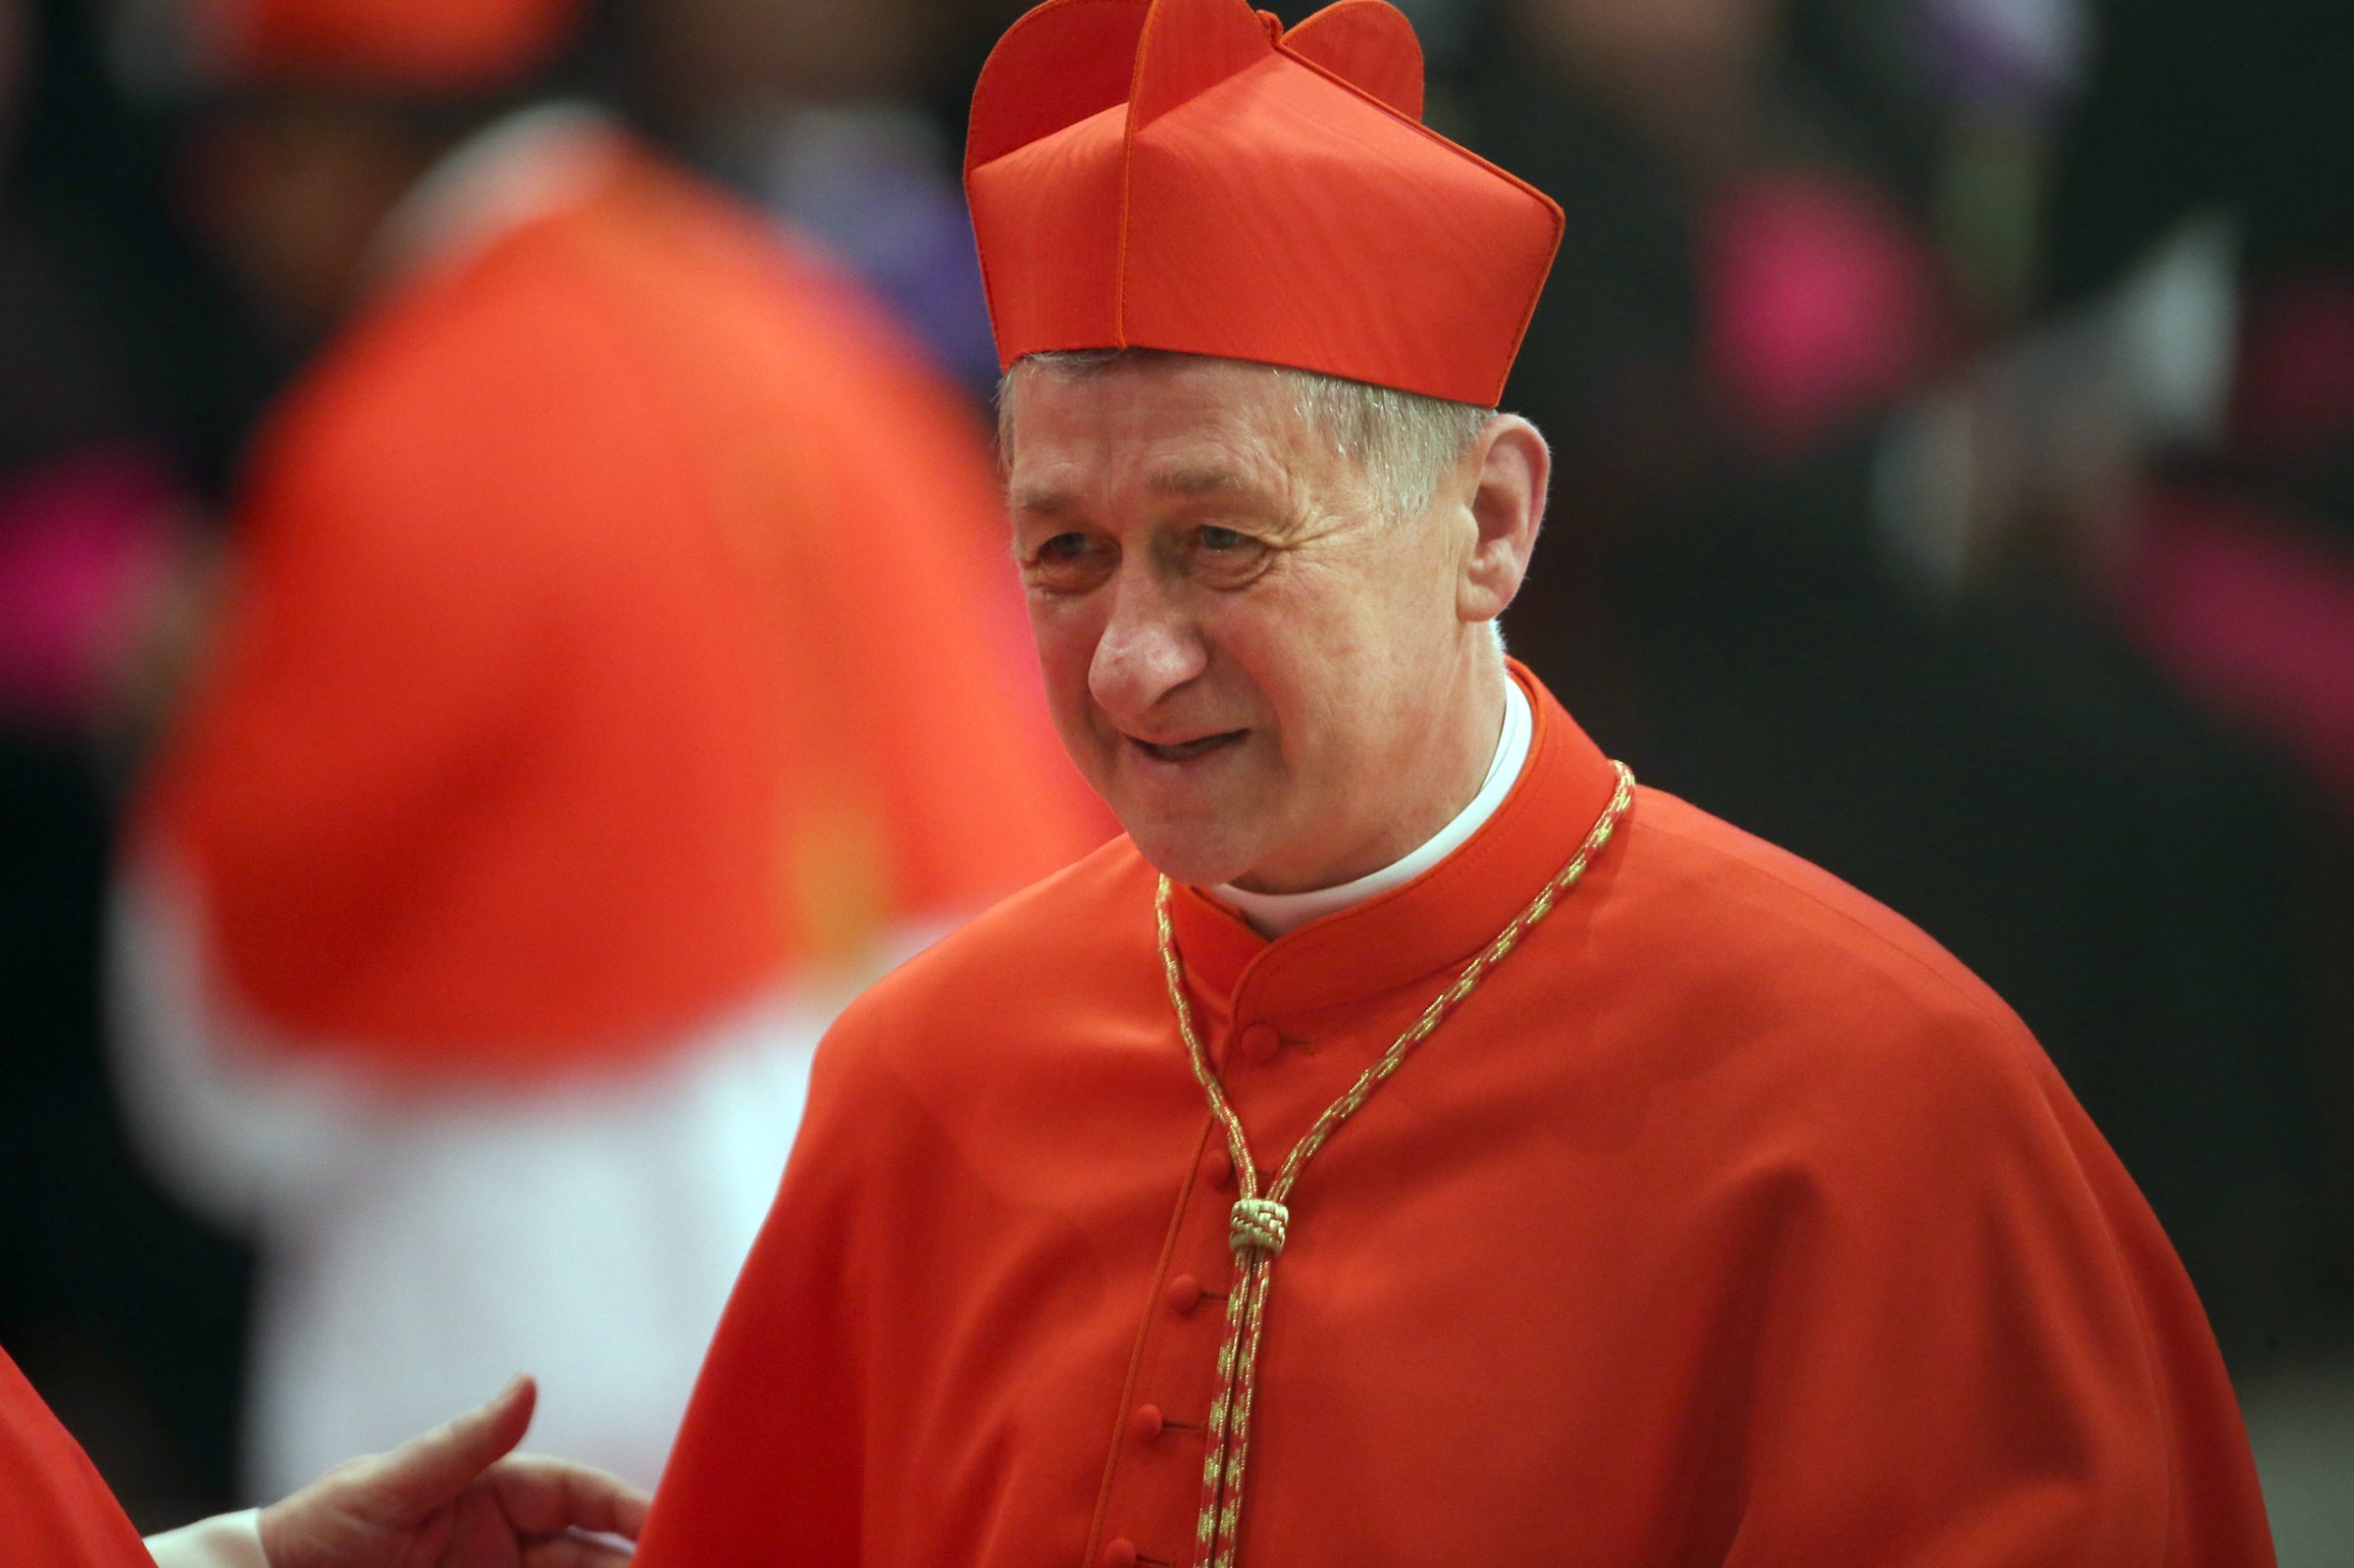 VATICAN CITY, VATICAN - NOVEMBER 19: Archbishop of Chicago Blase J. Cupich receives congratulations from cardinals during the Ordinary Public Consistory celebrated by Pope Francis at St. Peter's Basilica on November 19, 2016 in Vatican City, Vatican. Thirteen of the new Cardinals will be under 80 years and will be eligible to vote in a conclave. (Photo by Franco Origlia/Getty Images)